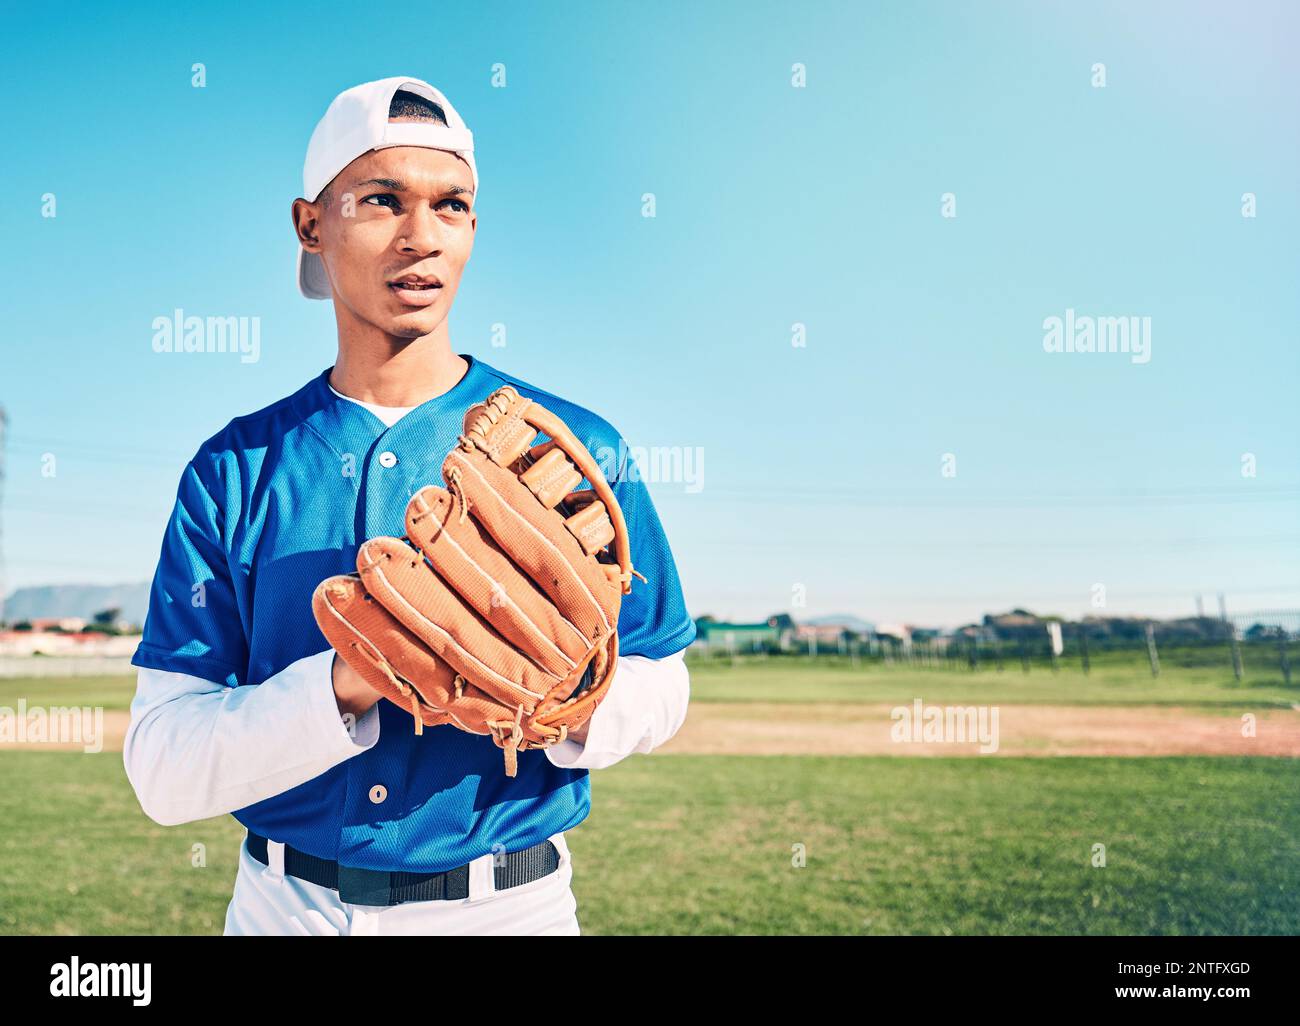 Mockup, baseball and man with glove, fitness and ready for game, confident and focus outdoor. Male athlete, gentleman and player with uniform Stock Photo